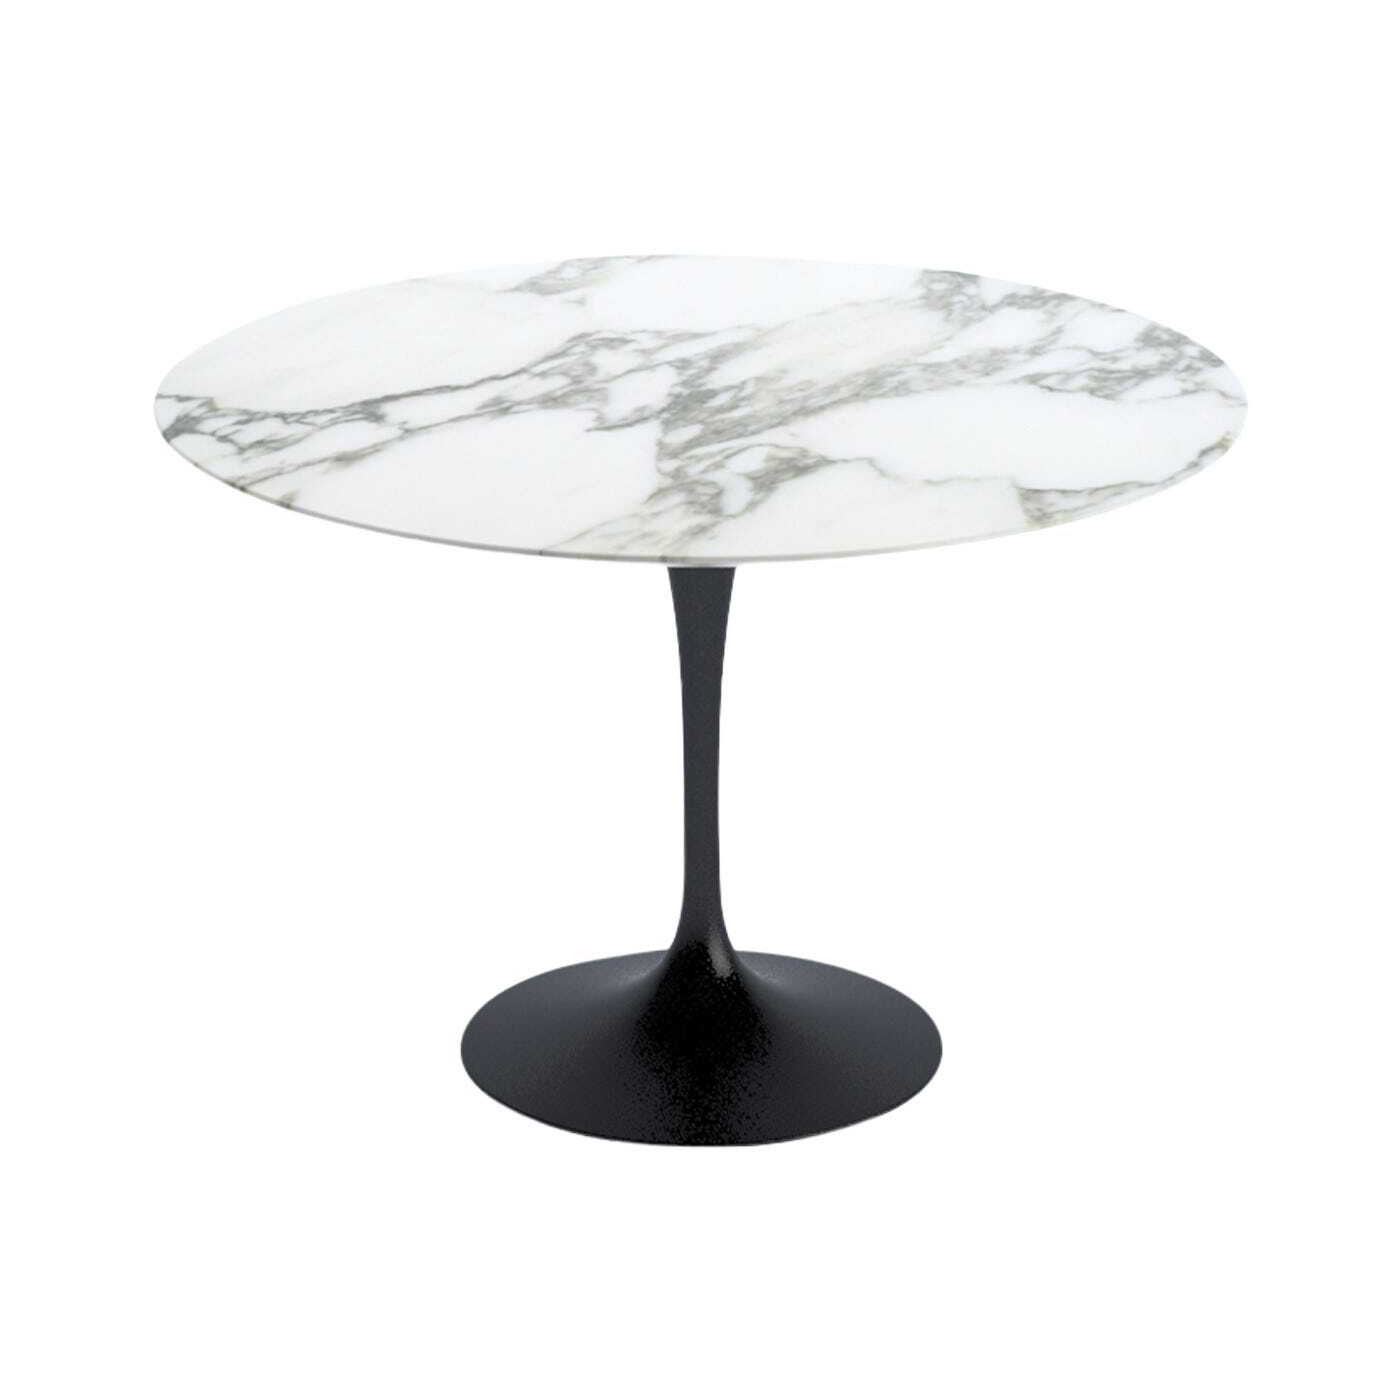 Knoll Saarinen Dining Table with Black Base in Arabescato 107cm - image 1